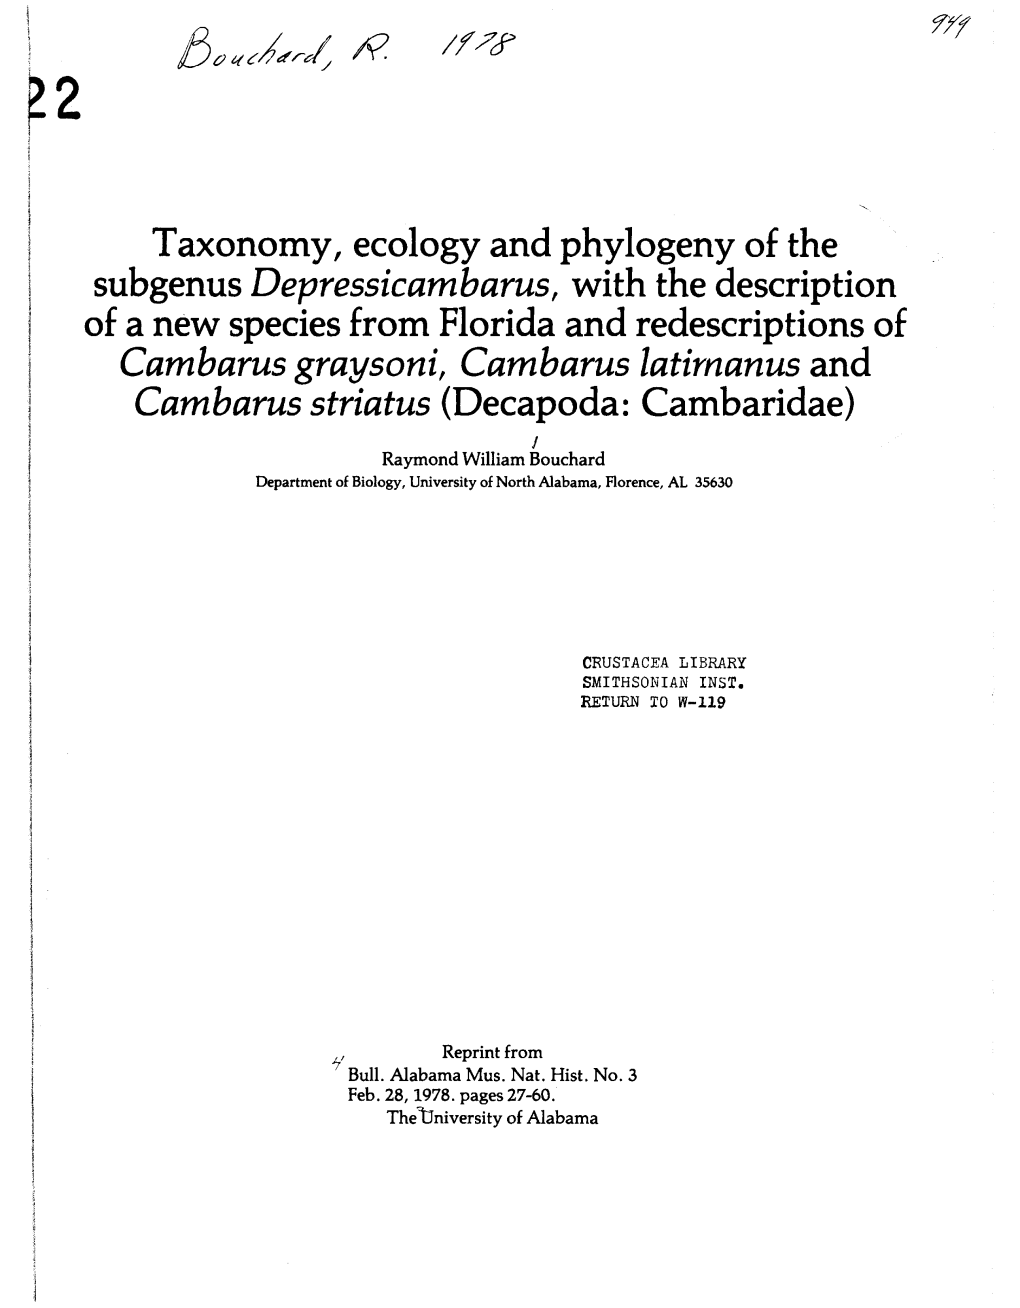 Taxonomy, Ecology and Phylogeny of the Subgenus Depressicambarus, with the Description of a New Species from Florida and Redescr